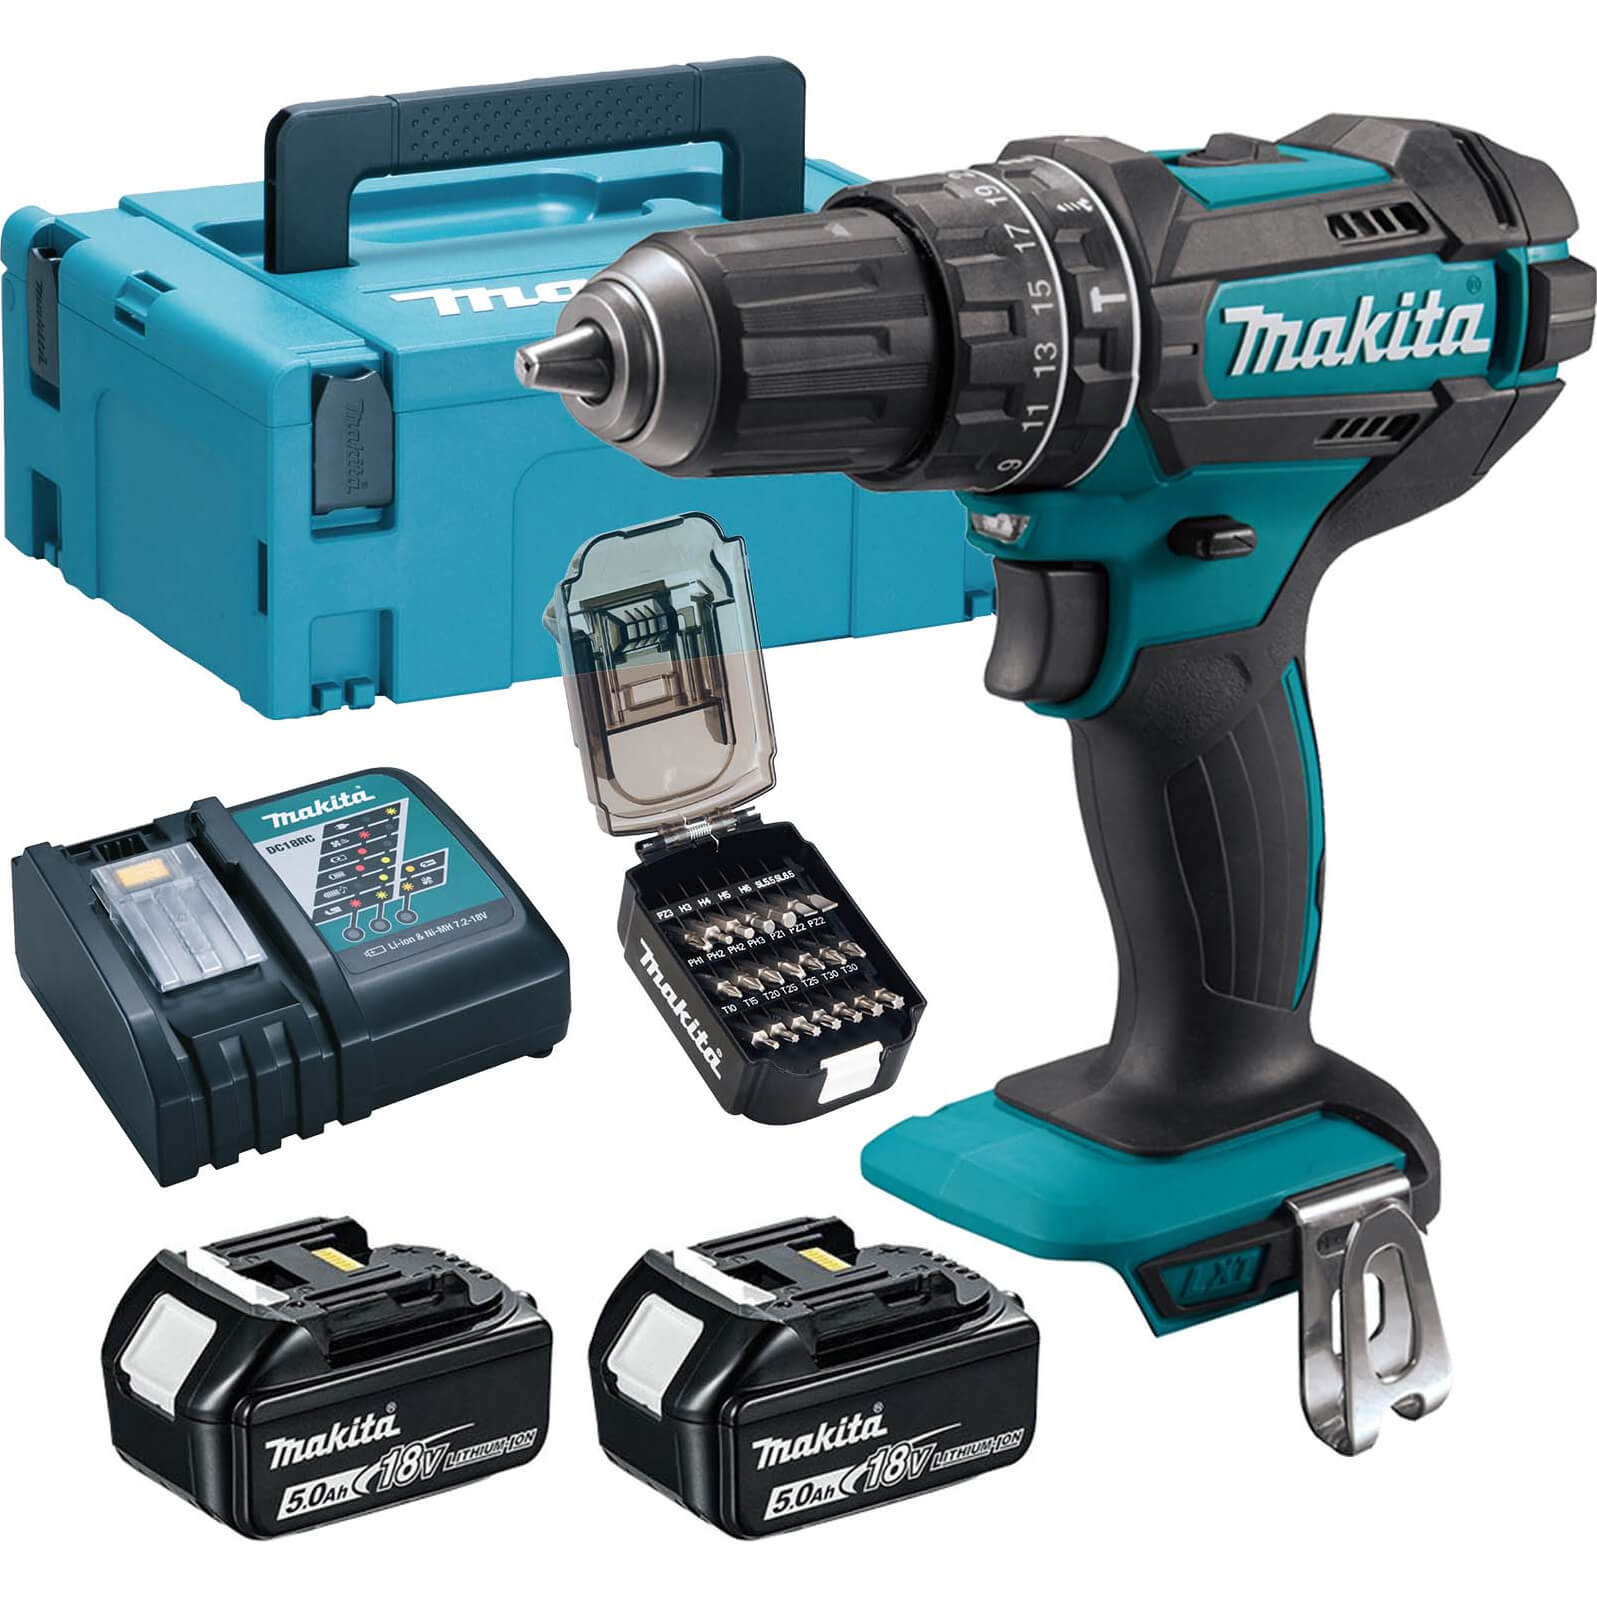 Image of Makita DHP482 18v LXT Cordless Combi Drill 2 x 5ah Li-ion Charger Case & 21 Accessories